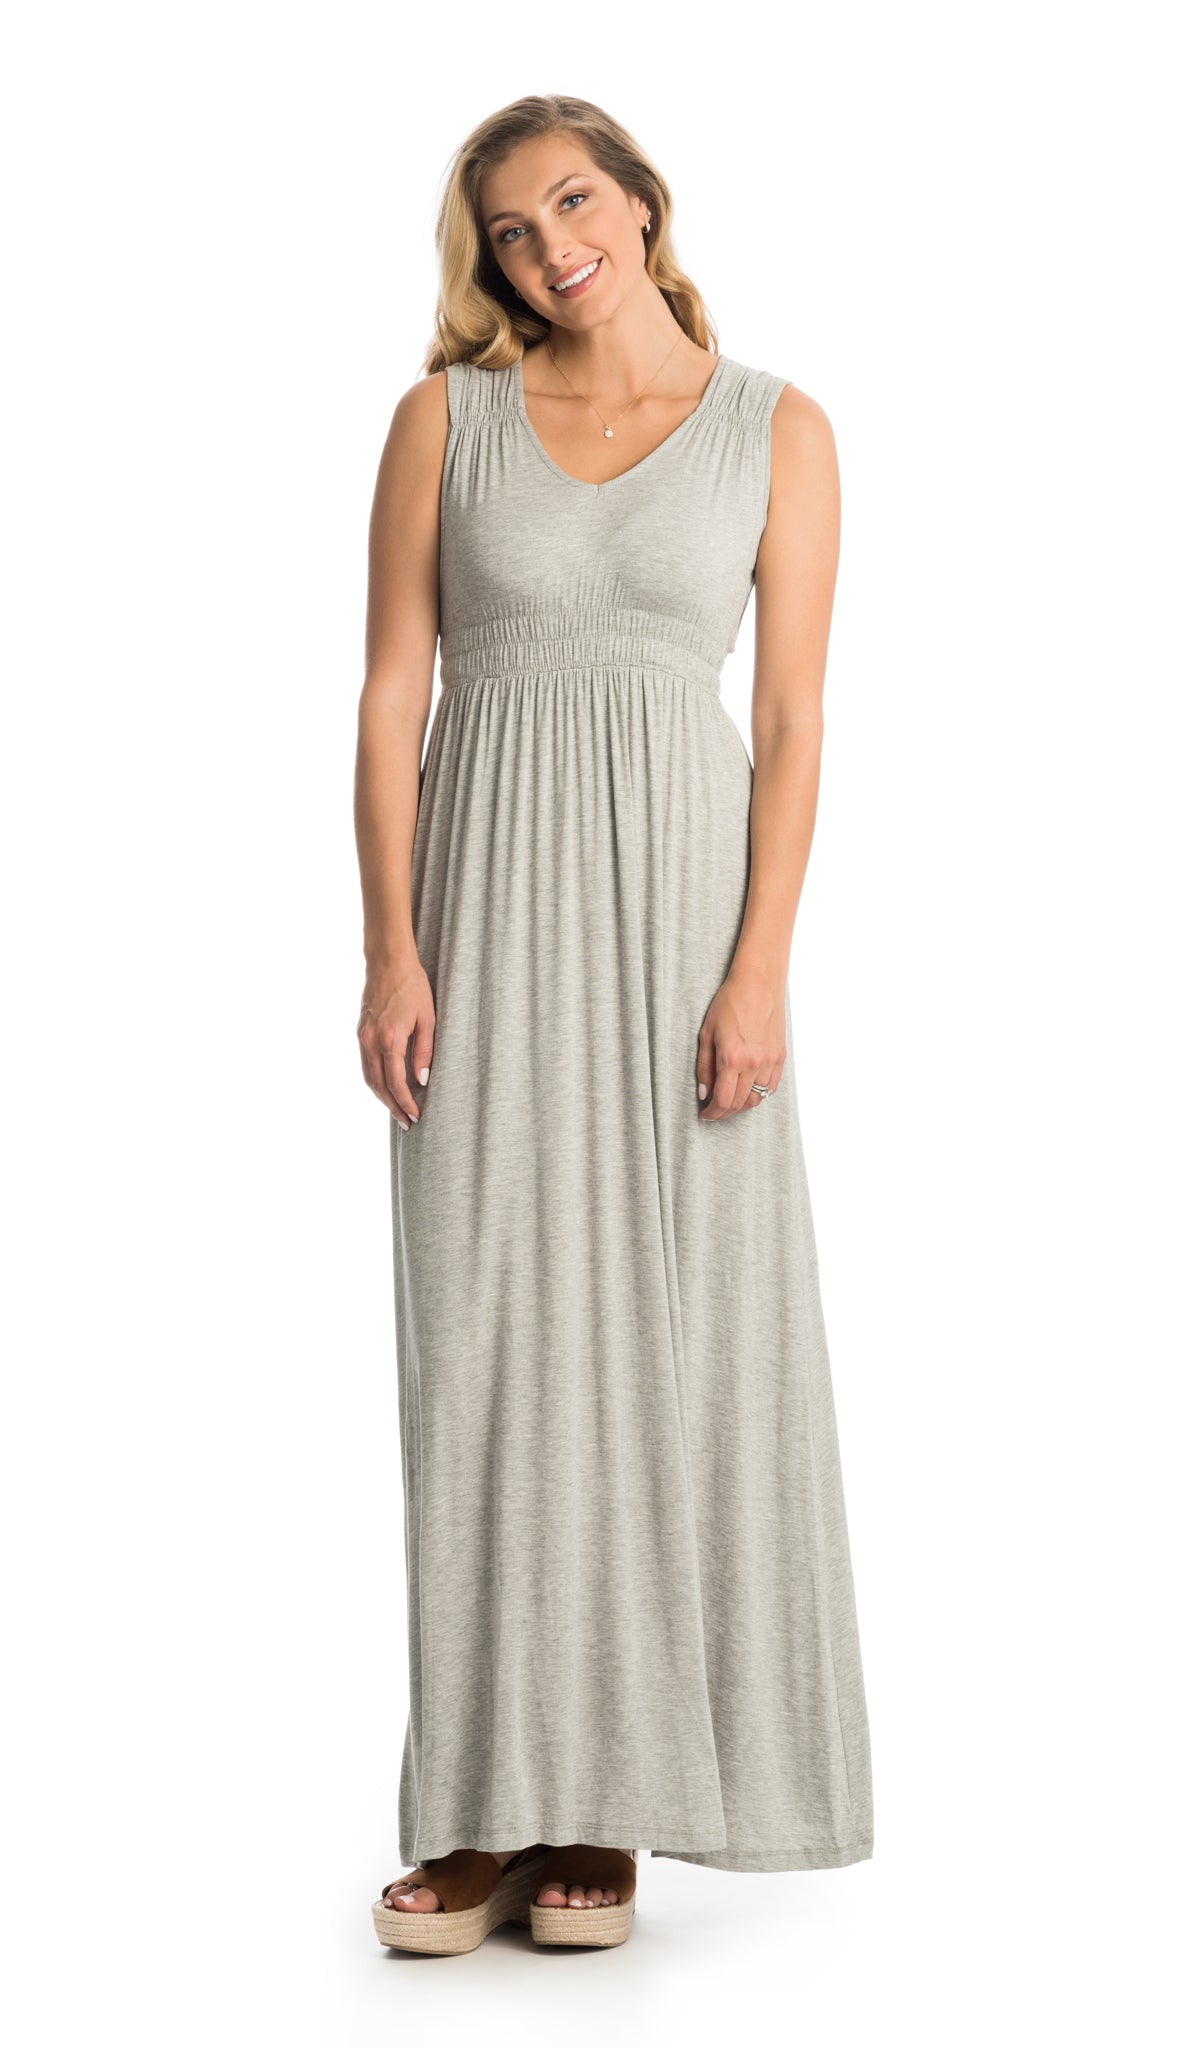 Heather Grey Valeria dress worn as non-maternity style by woman standing with arms down to side.